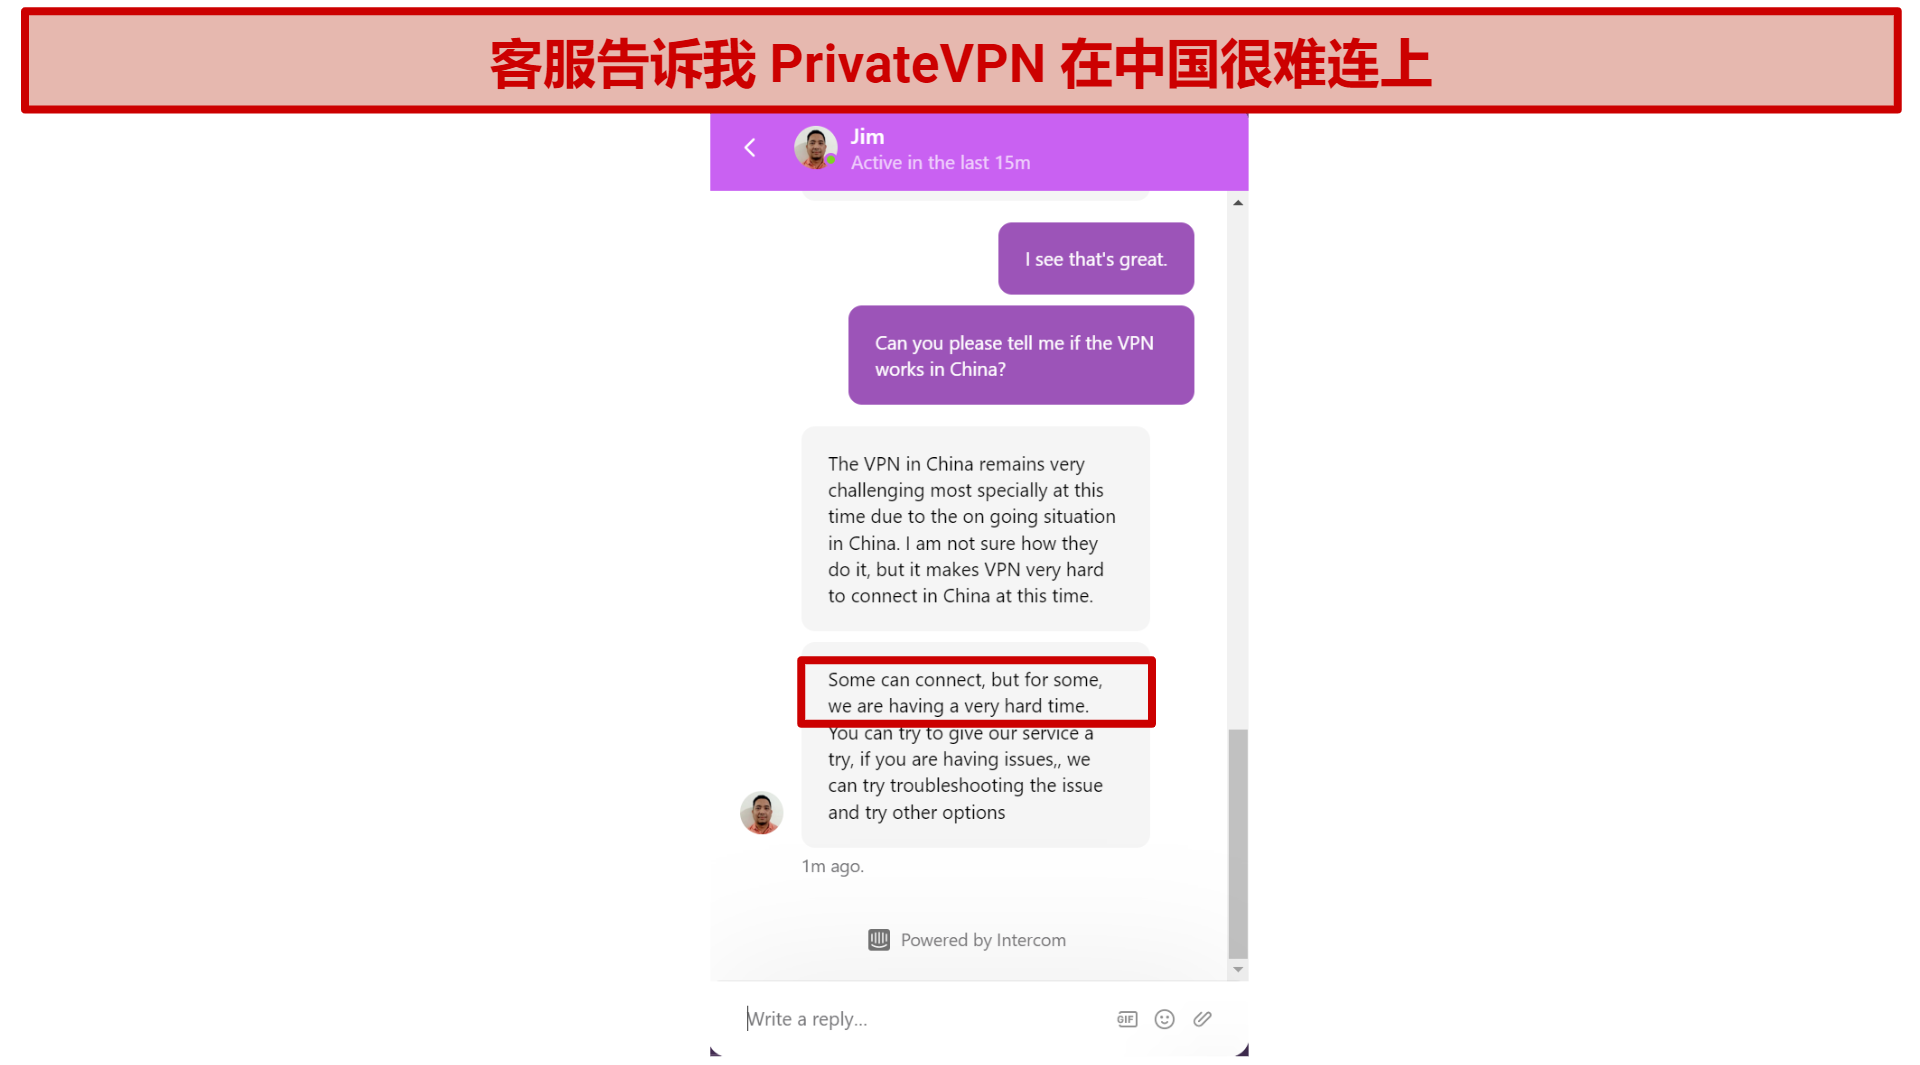 Screenshot of PrivateVPN live chat where support staff told me it doesn't always work in China